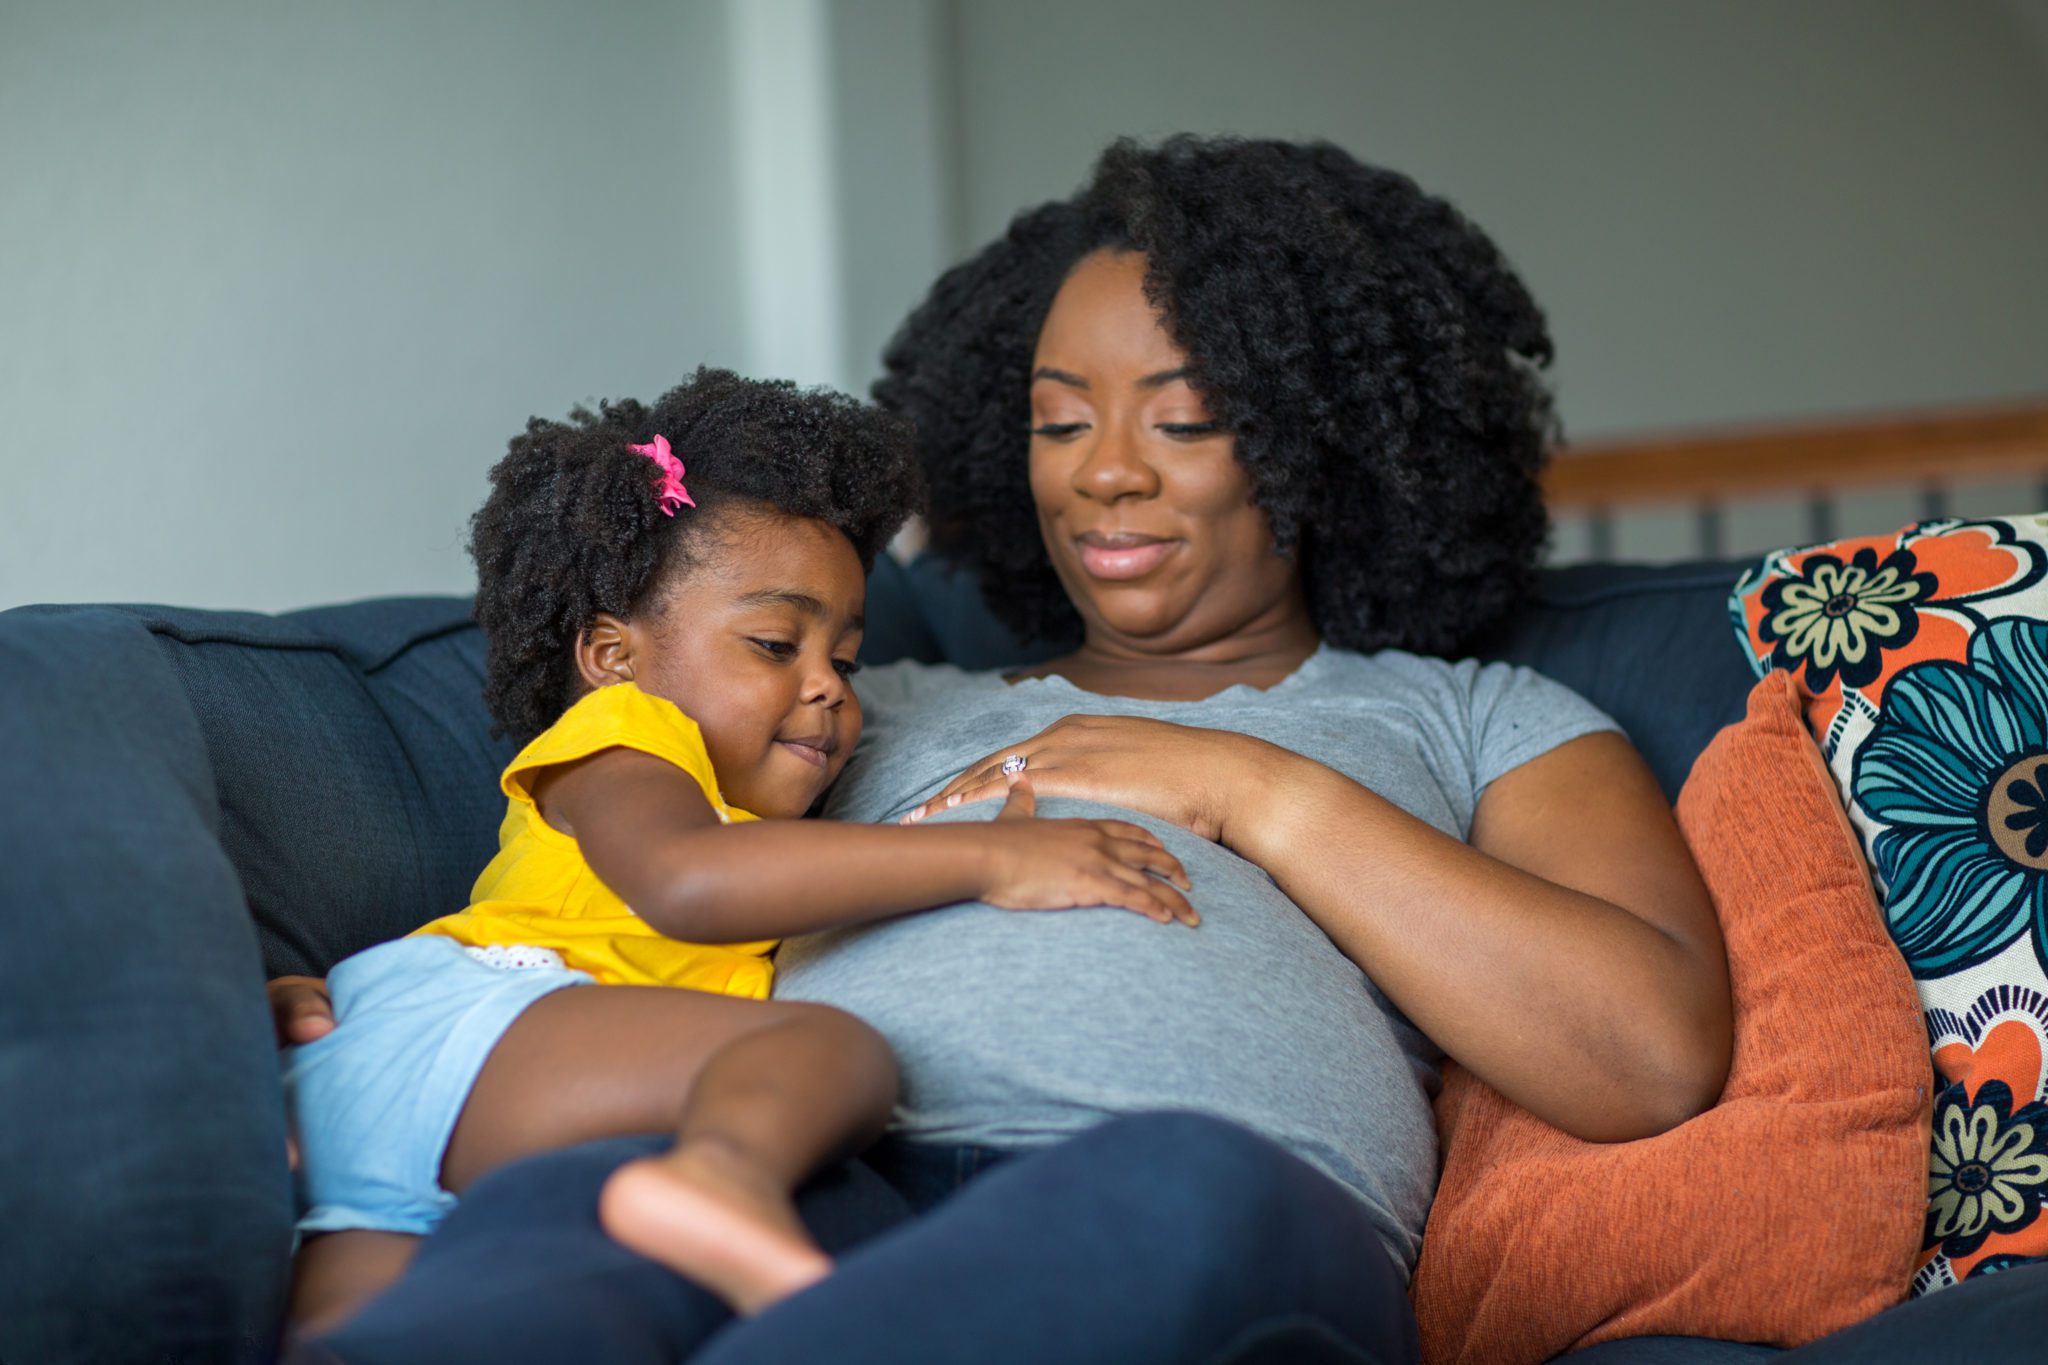 Pregnant black woman with daughter U.S. Maternal Health and Rights Initiative